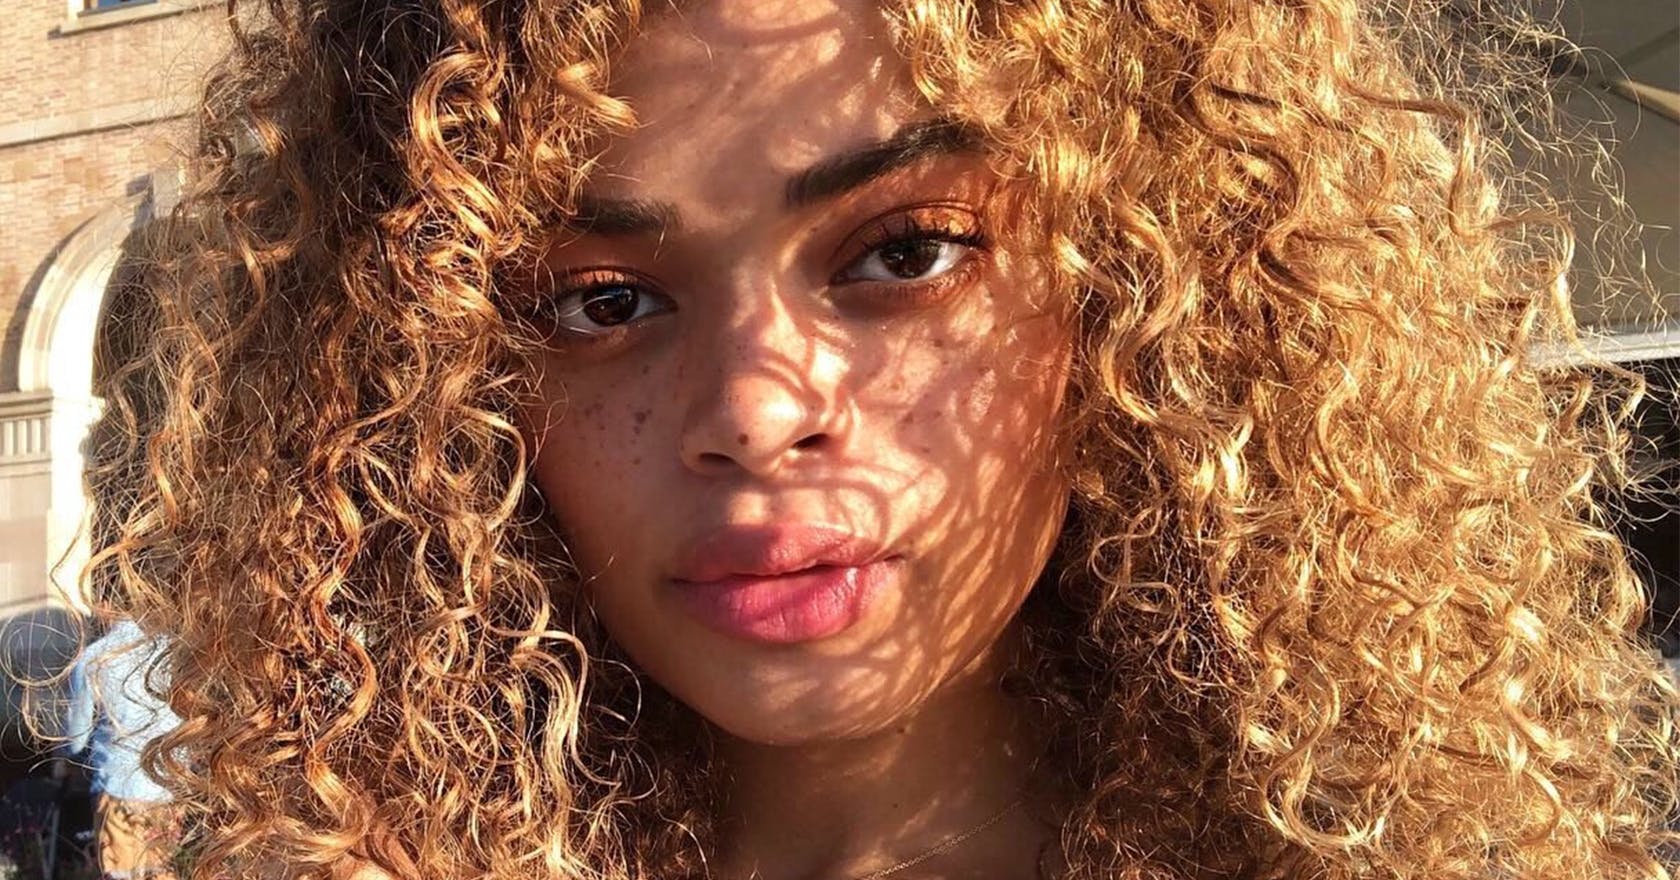 Our junior beauty writer's curly hair routine - in micro detail